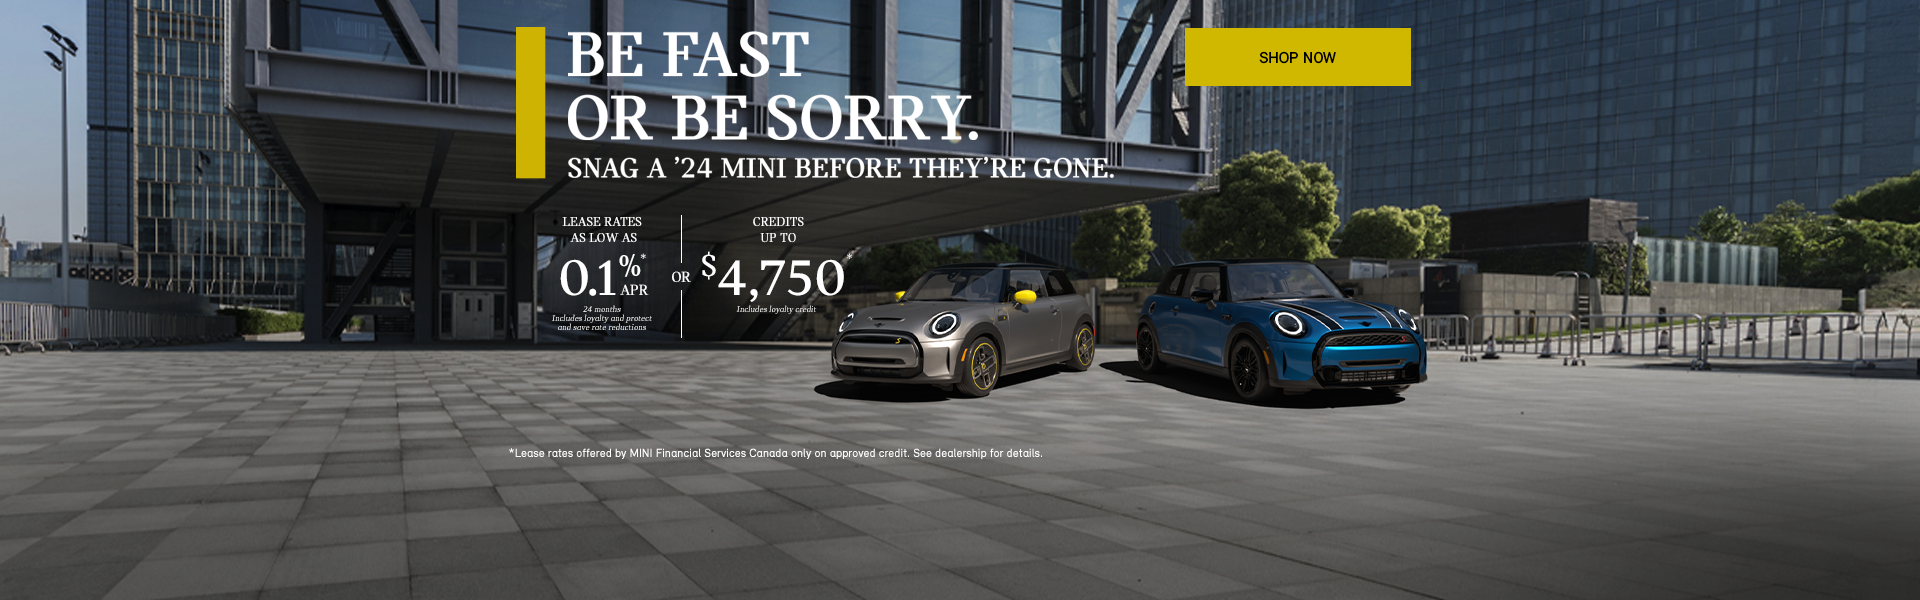 Be Fast or Be Sorry